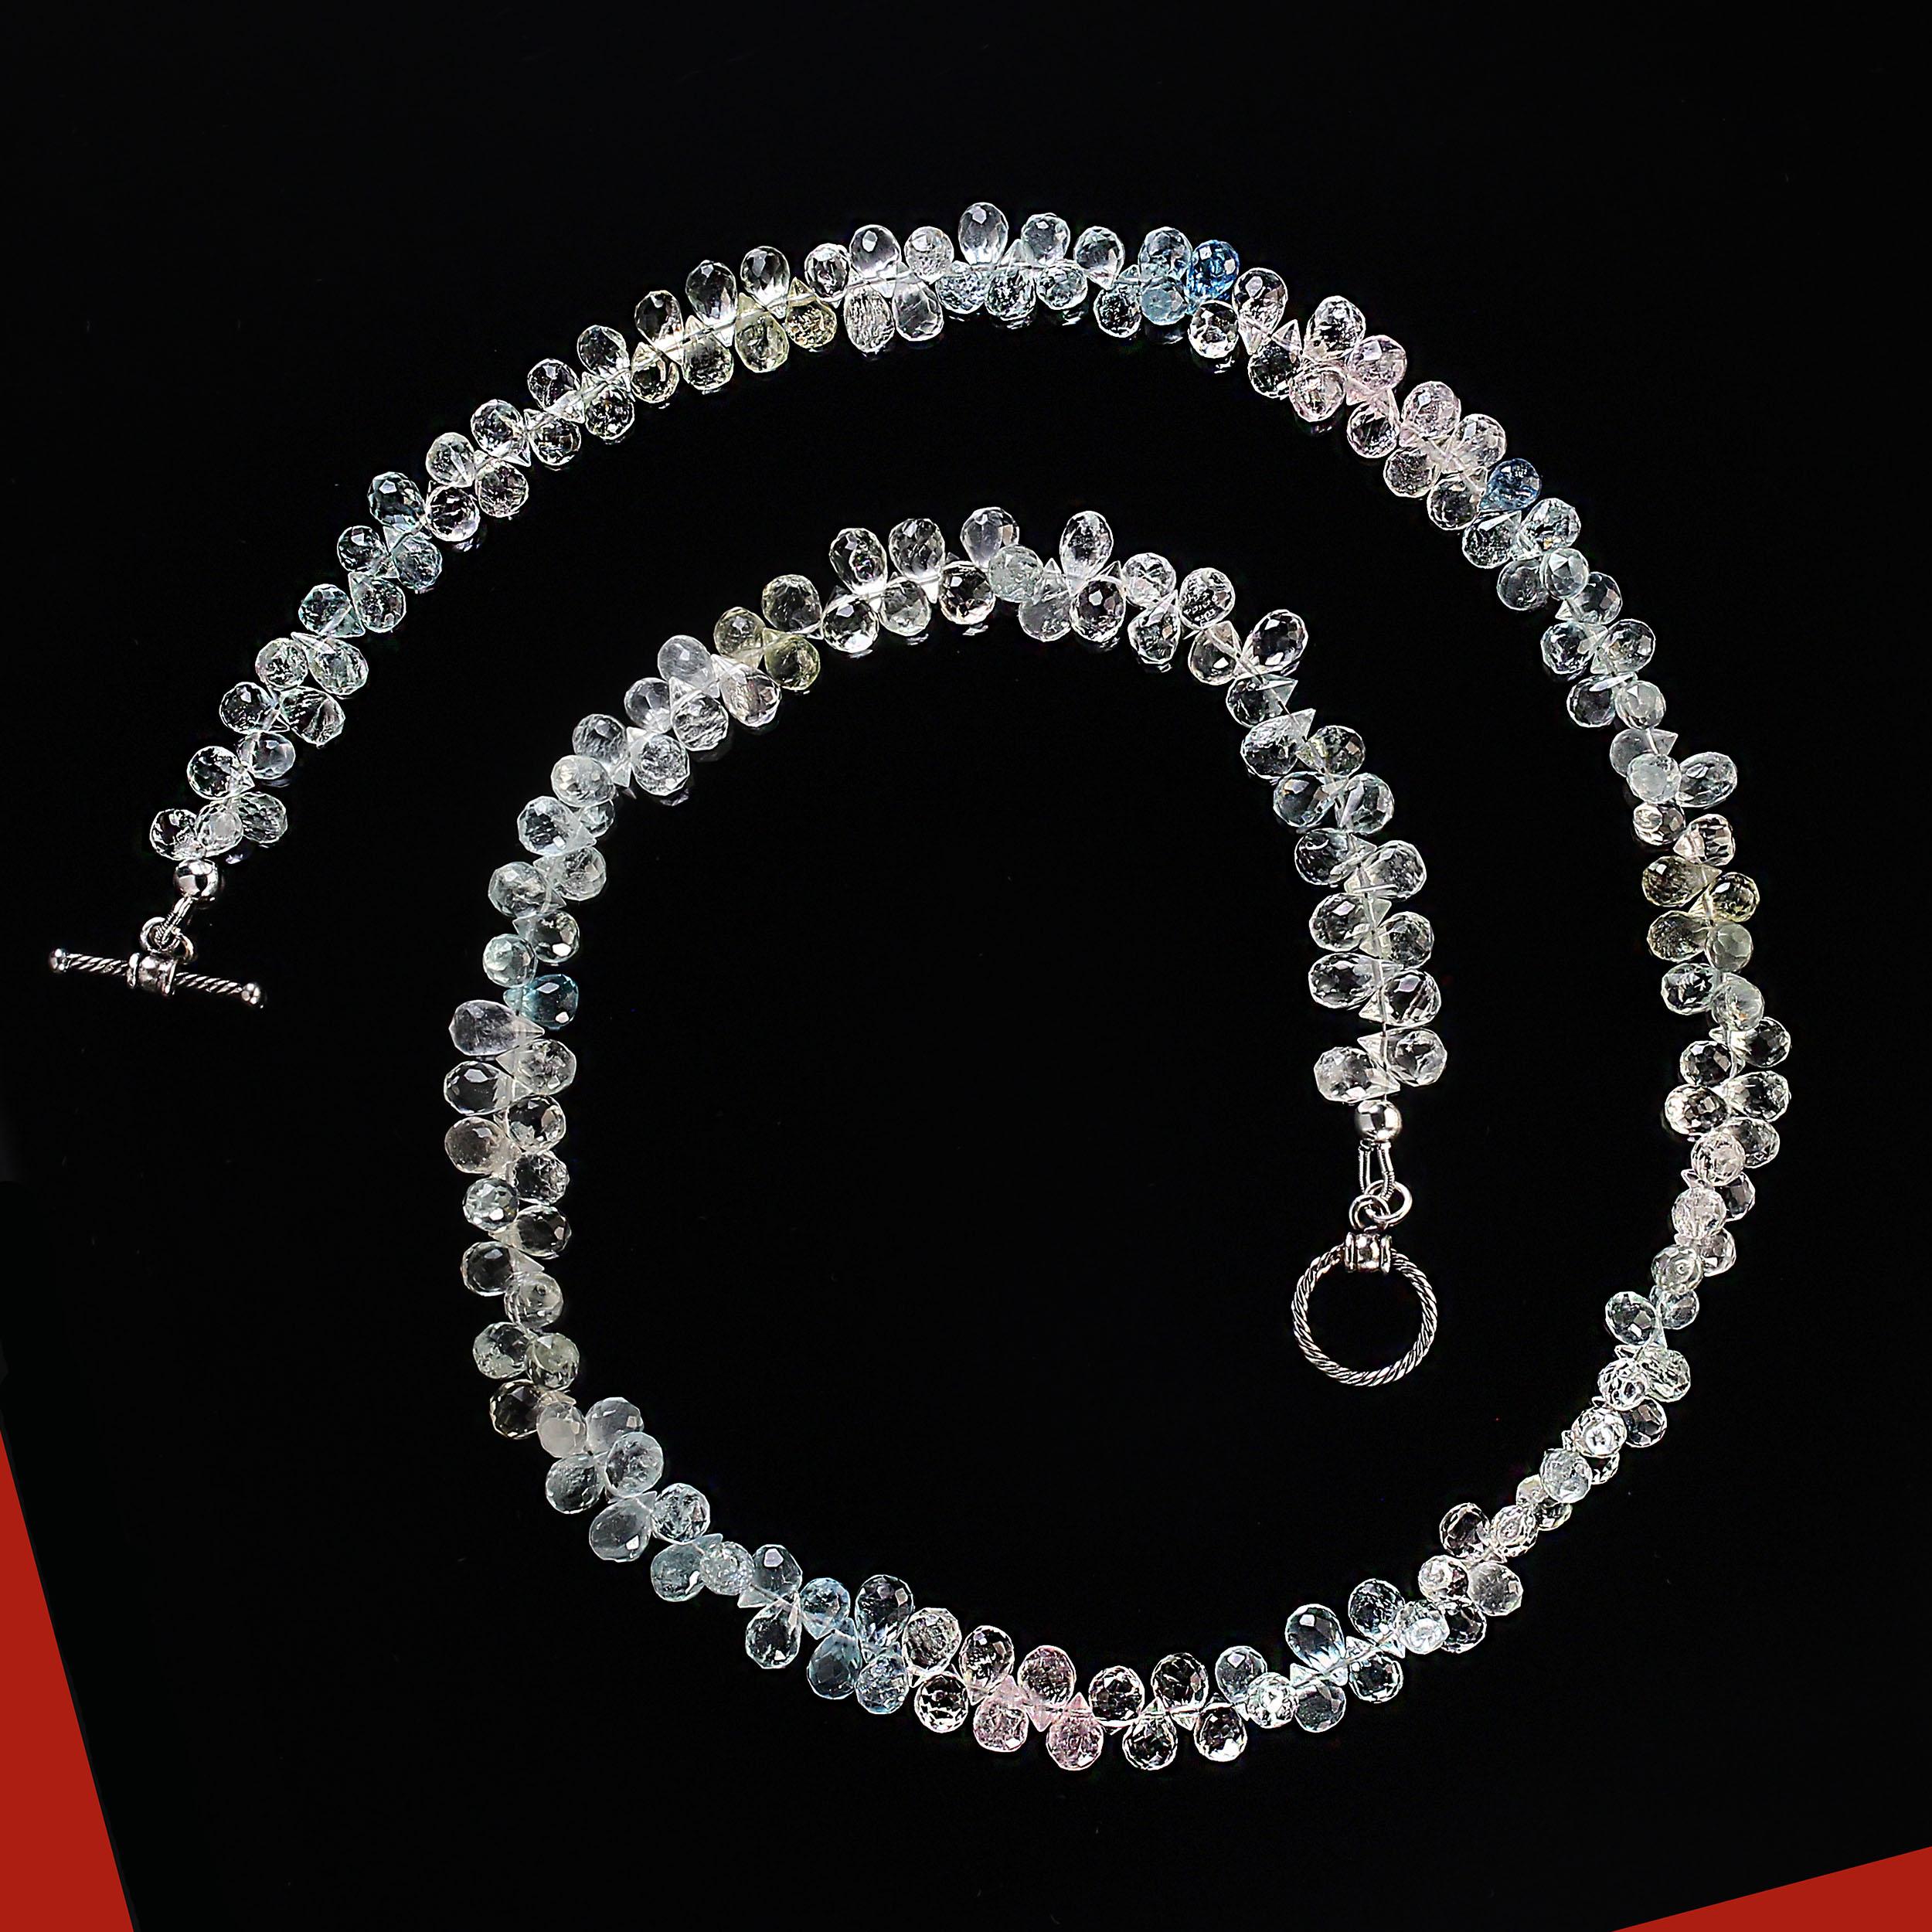 20-Inch necklace of multi color sparkling briolette beryls. These 6mm, faceted glittering beryls are all the usual beryl colors with aquamarine and morganite featured.  This unique and very wearable necklace is secured with a delicate twisted silver